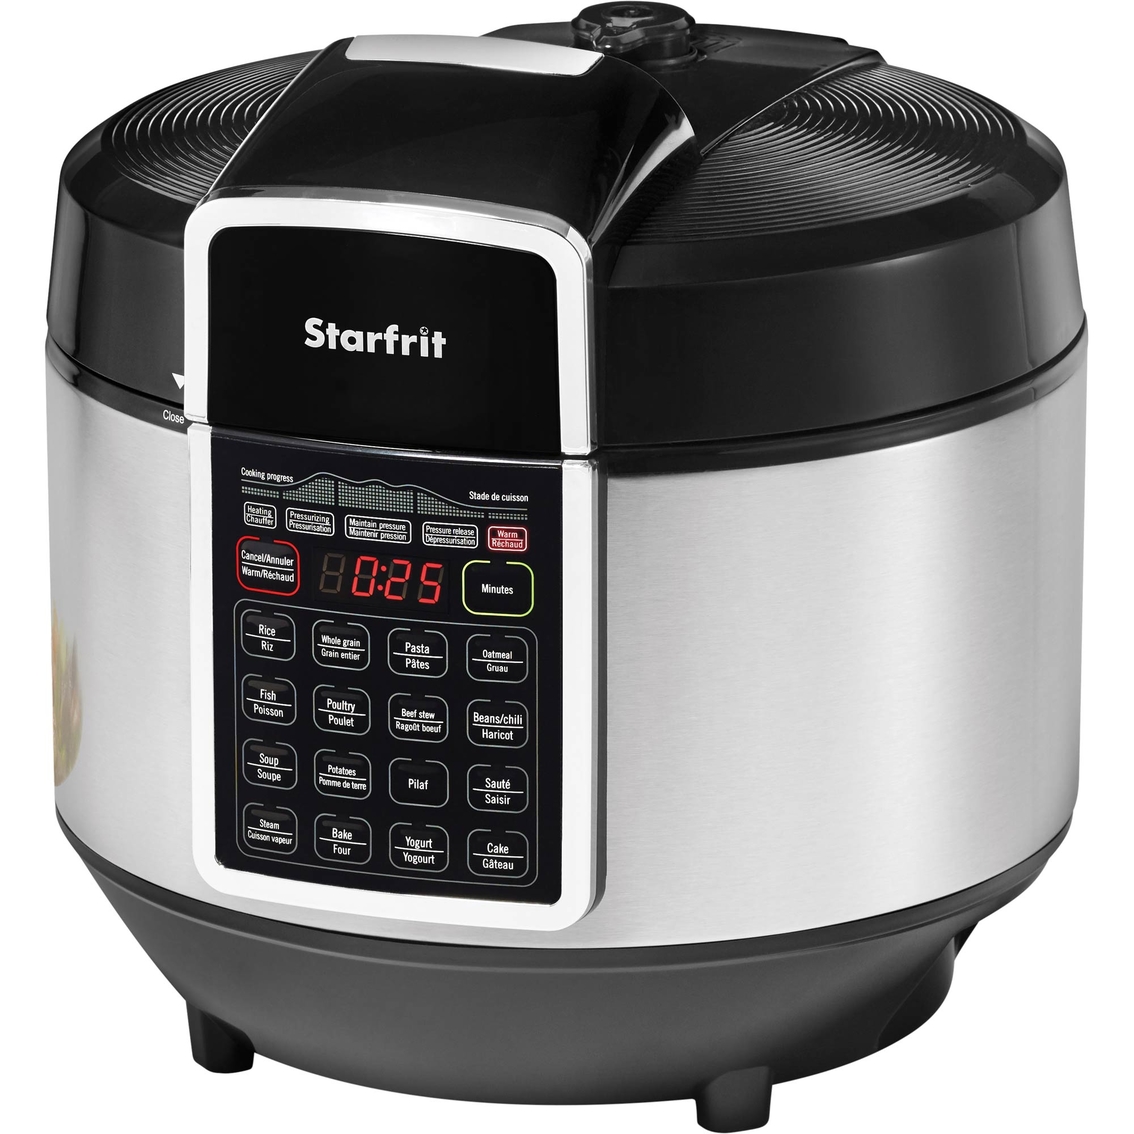 Starfrit Electric Pressure Cooker - Image 3 of 10